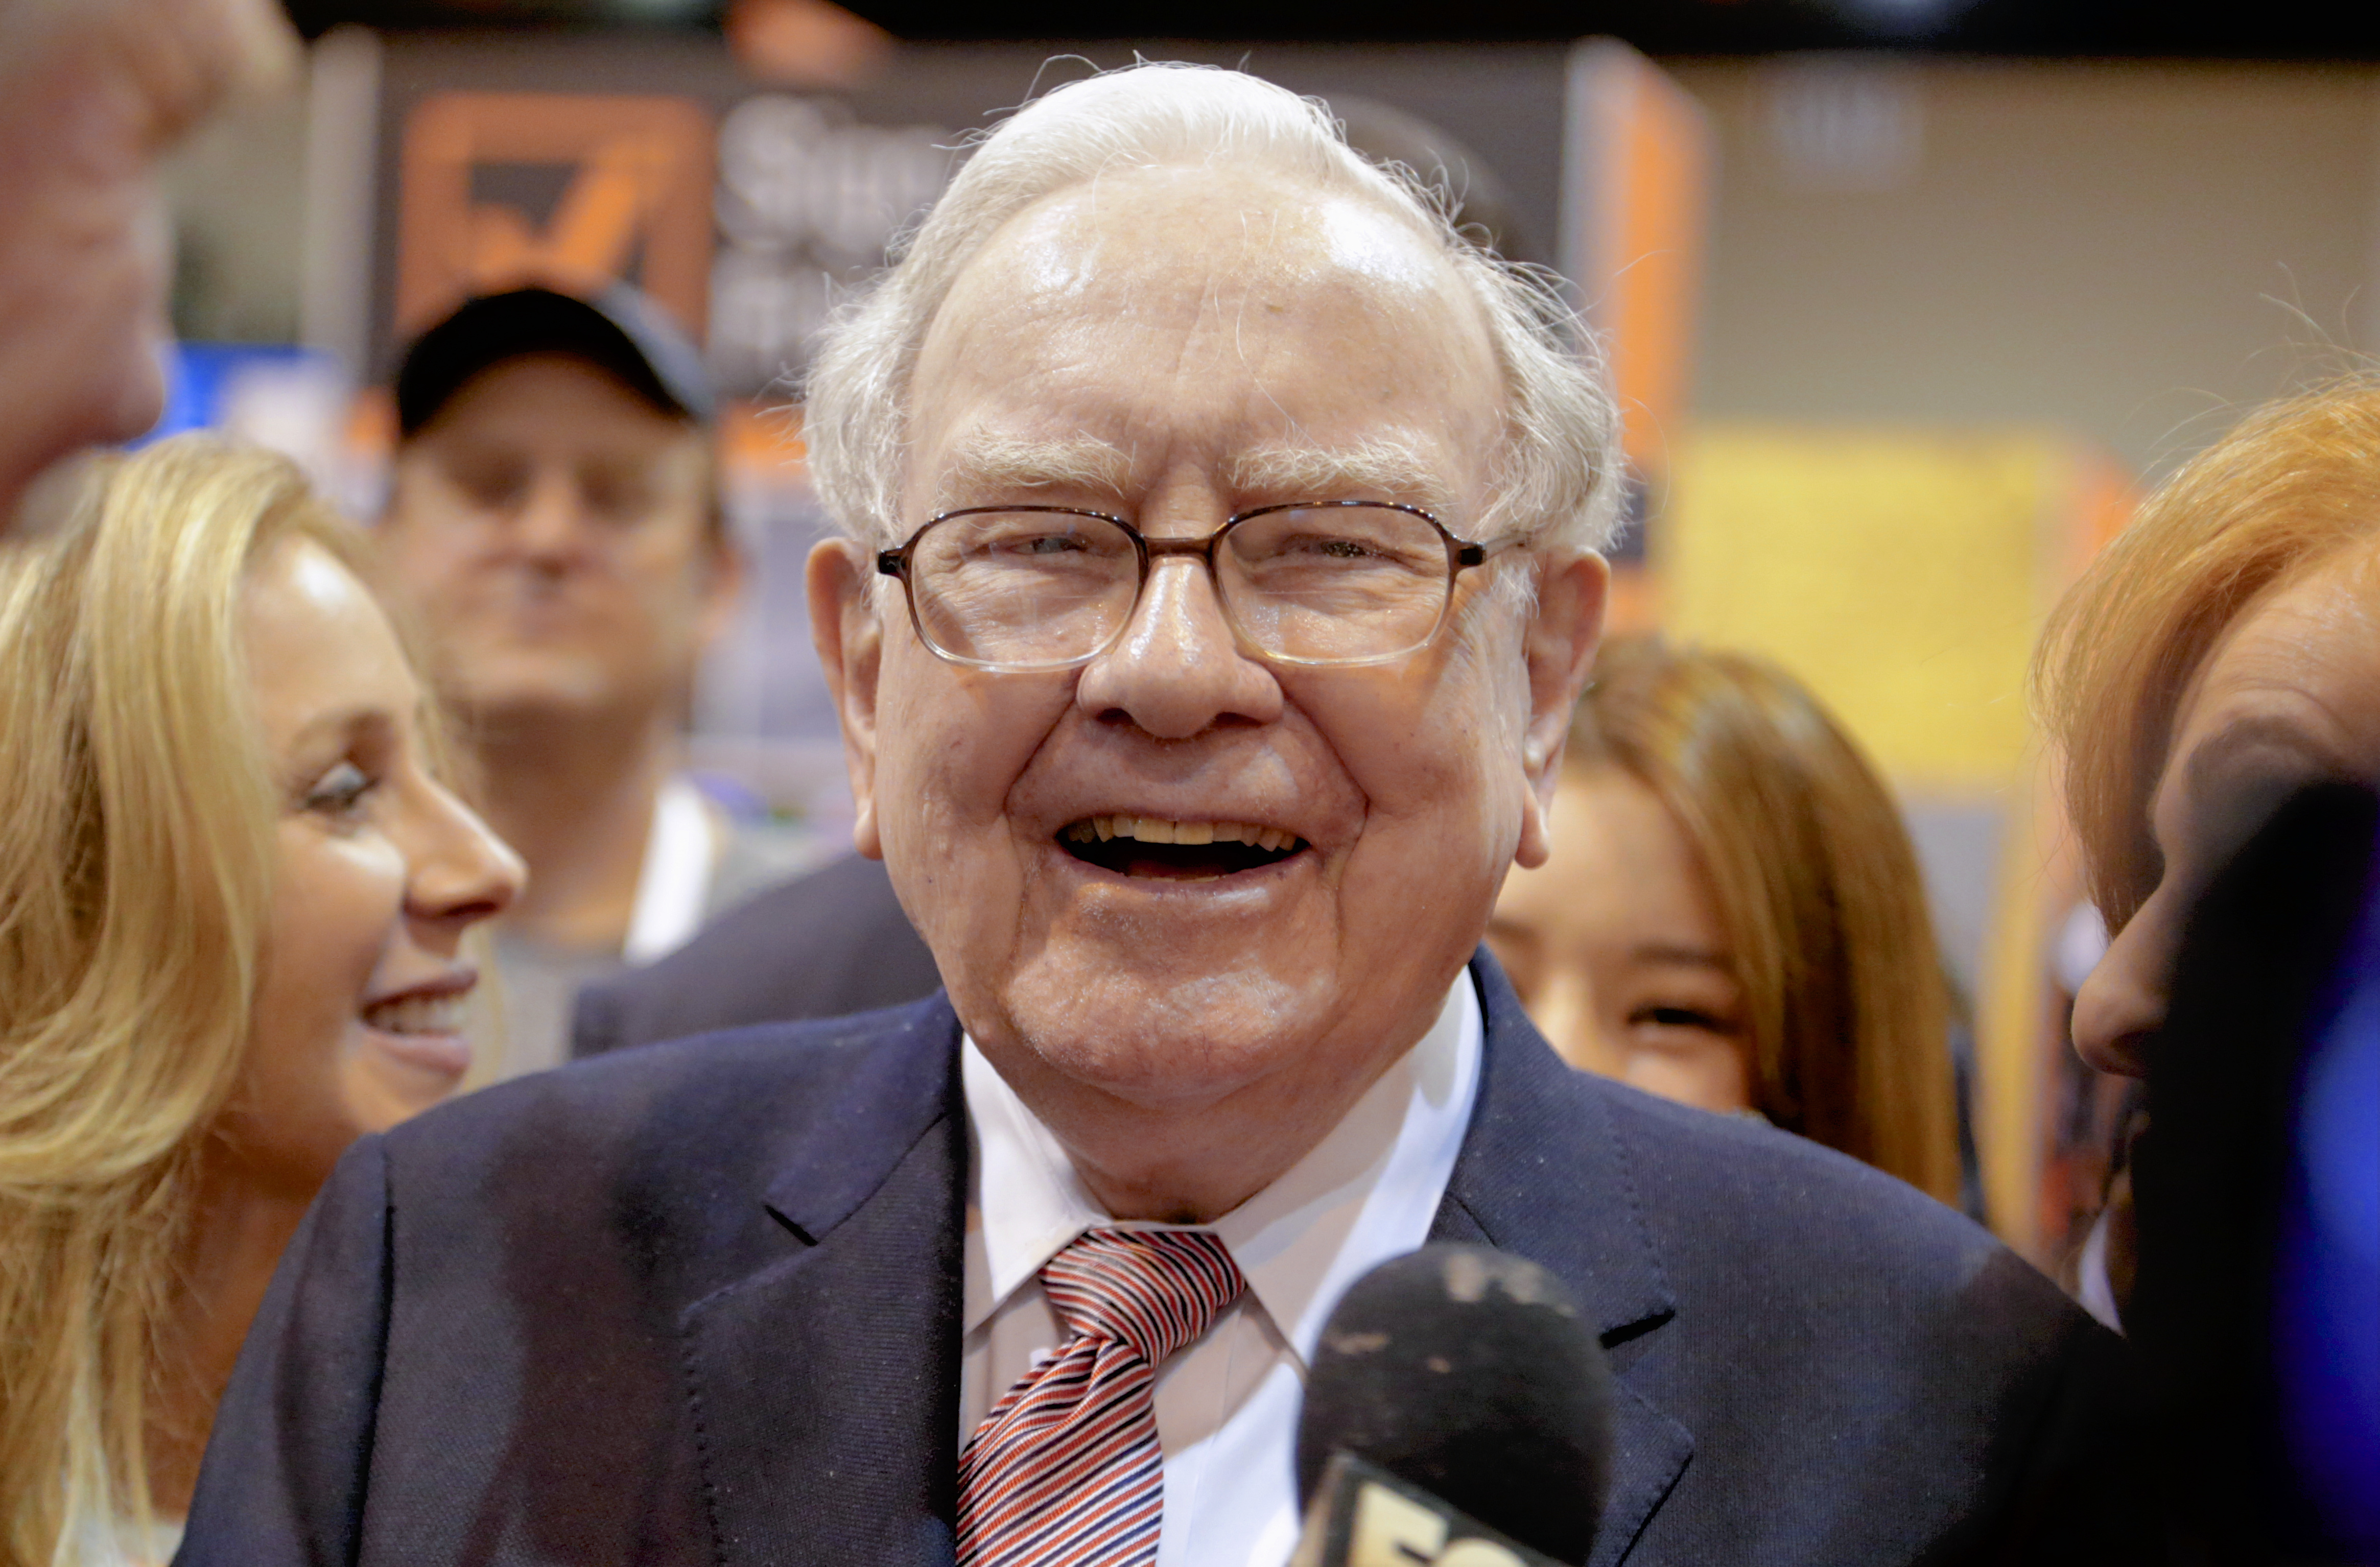 Berkshire Hathaway Chairman and CEO Warren Buffett laughs while touring the exhibit floor at the CenturyLink Center in Omaha, Neb., Saturday, May 6, 2017, where company subsidiaries display their products. (Nati Harnik—AP)